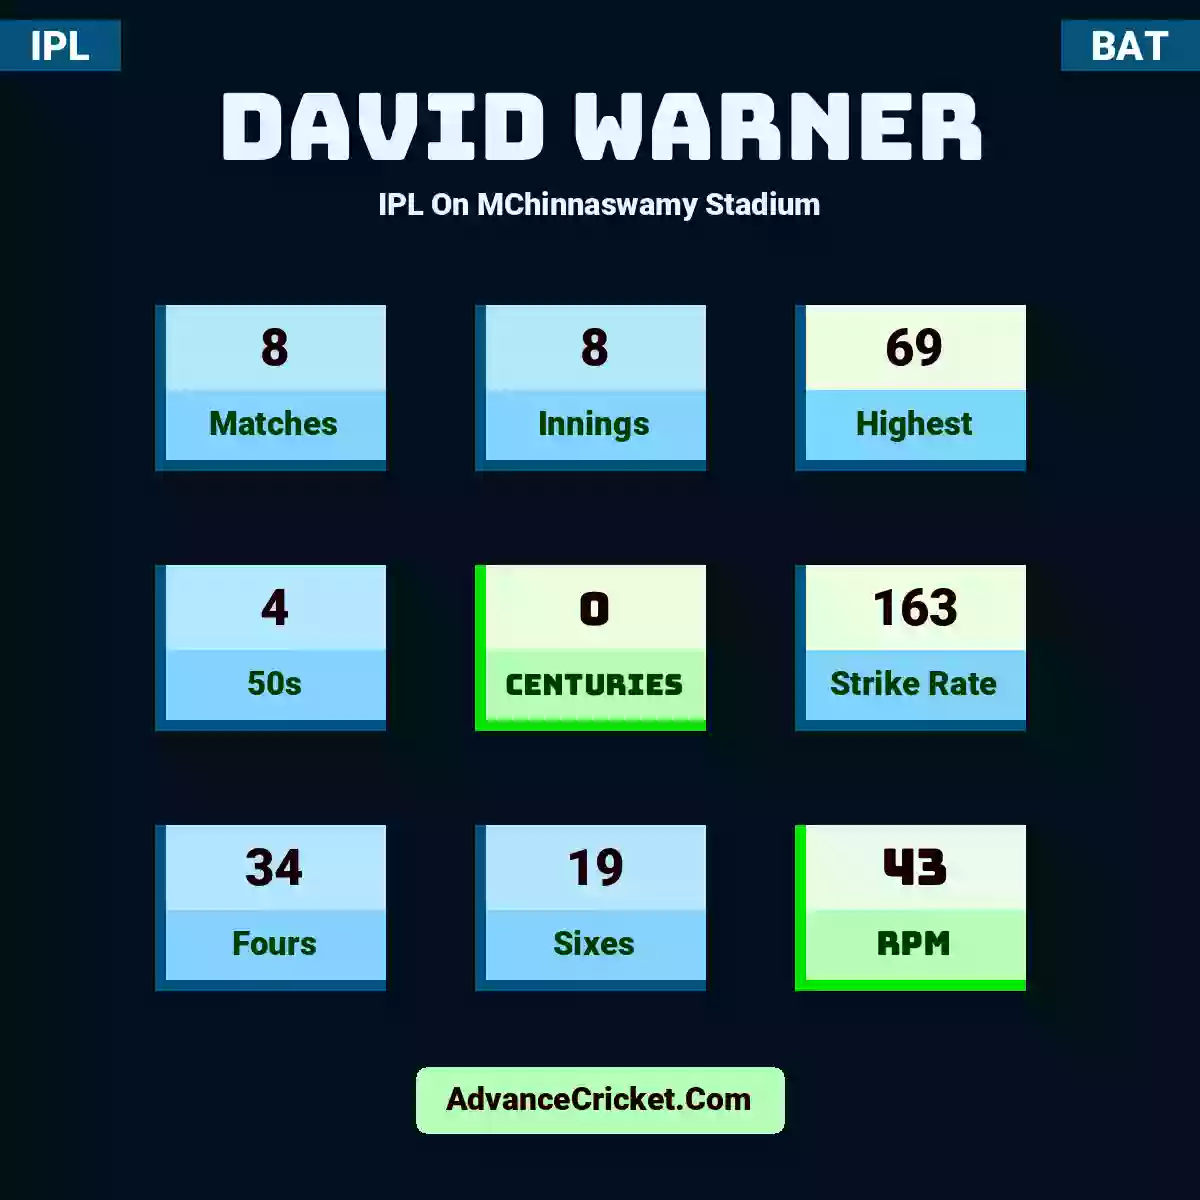 David Warner IPL  On MChinnaswamy Stadium, David Warner played 8 matches, scored 69 runs as highest, 4 half-centuries, and 0 centuries, with a strike rate of 163. D.Warner hit 34 fours and 19 sixes, with an RPM of 43.